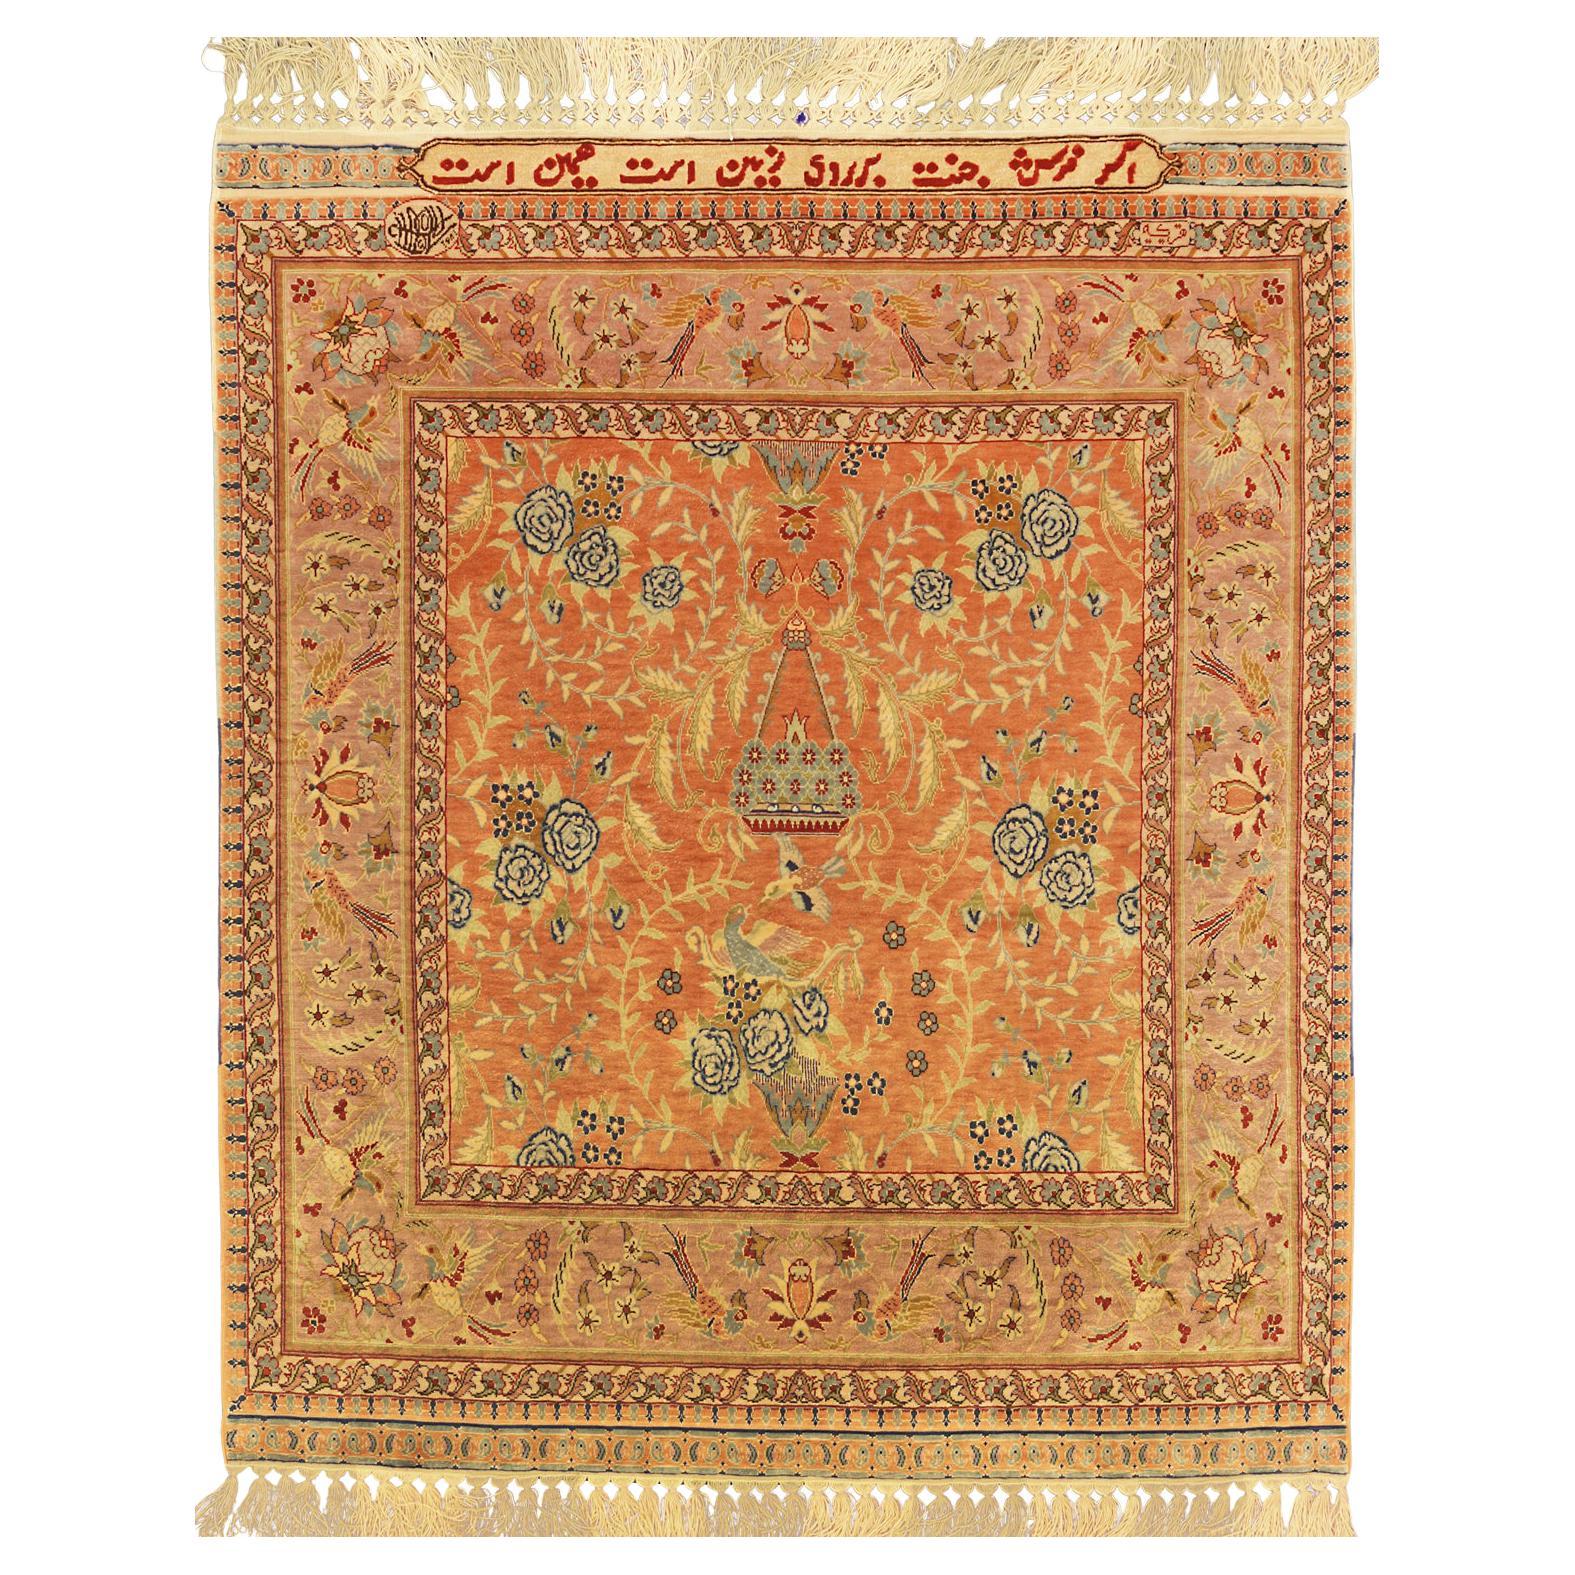 Turkish Hereke Silk & Metal Signed Rug with an All-Over Design, XXI Century For Sale